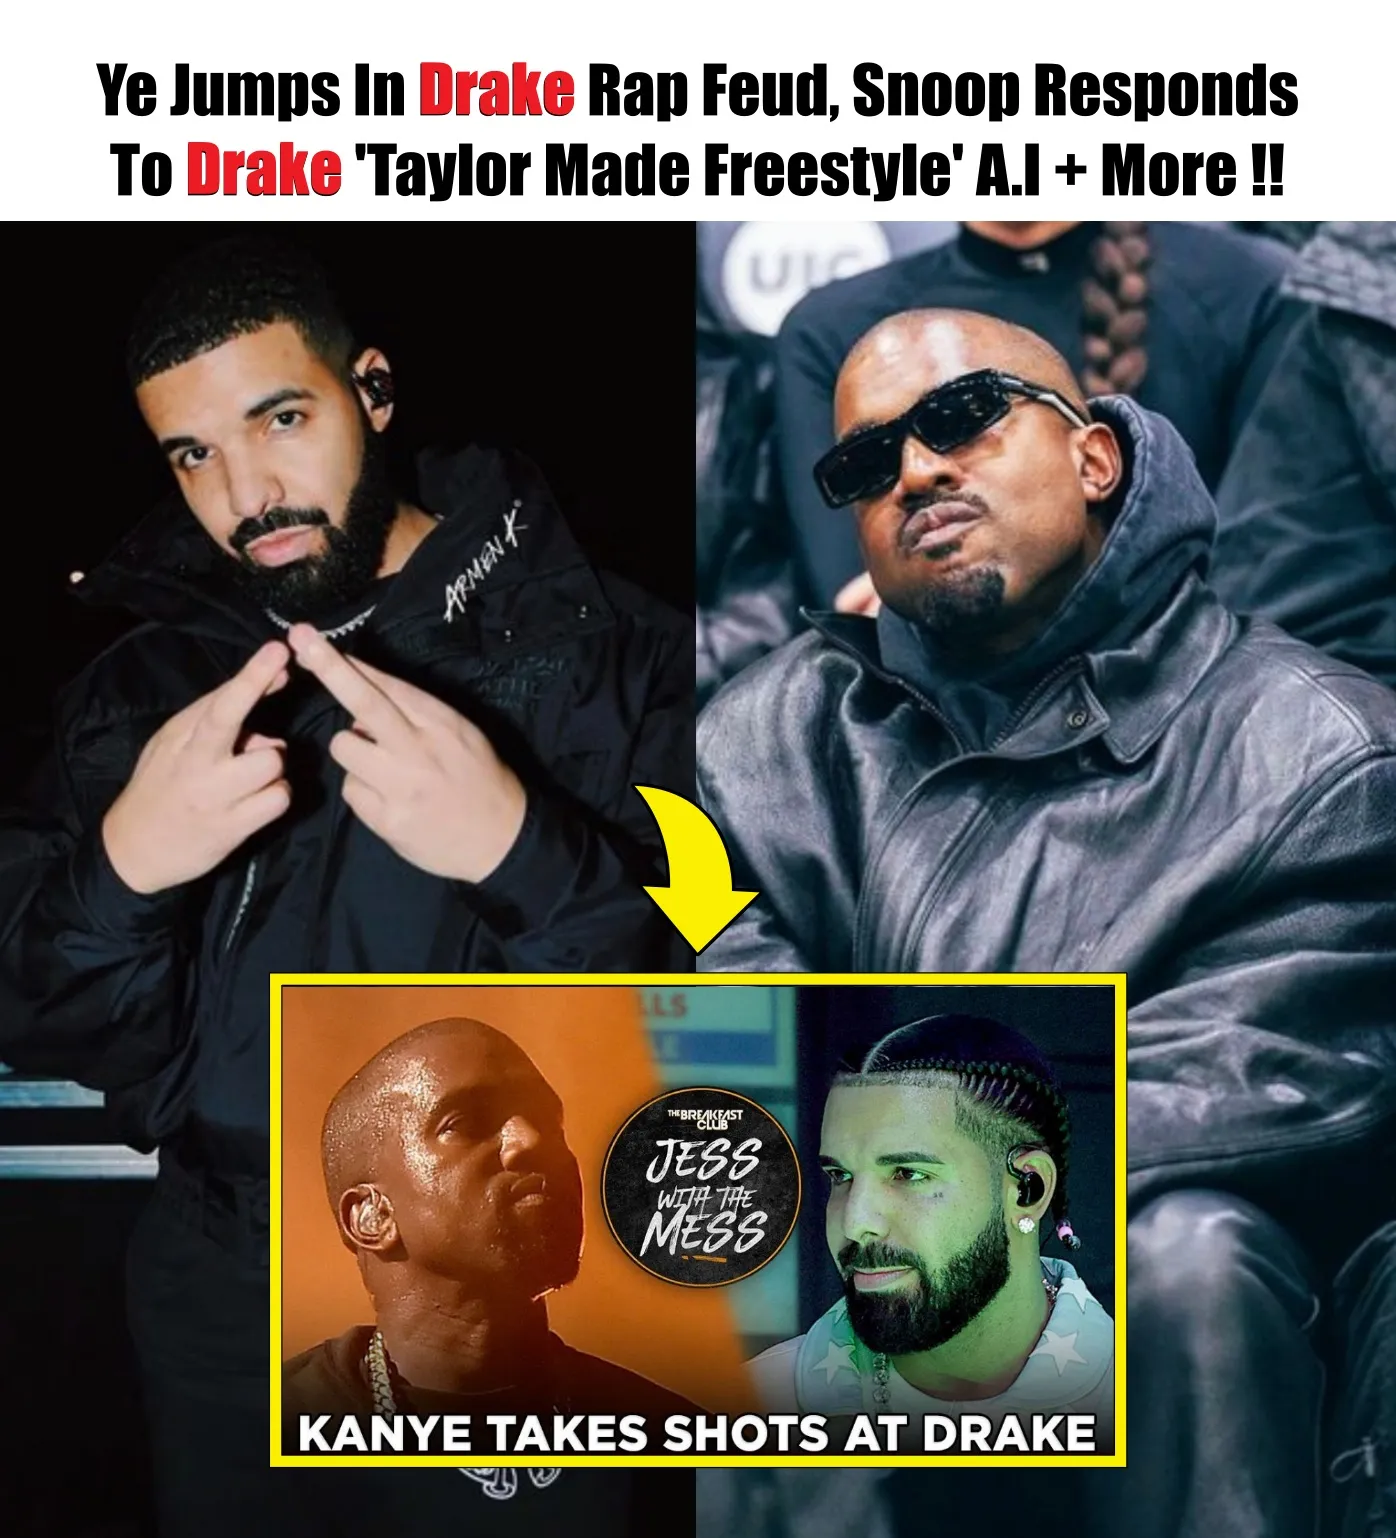 Cover Image for Ye Jumps In Drake Rap Feud, Snoop Responds To Drake ‘Taylor Made Freestyle’ A.I + More !!